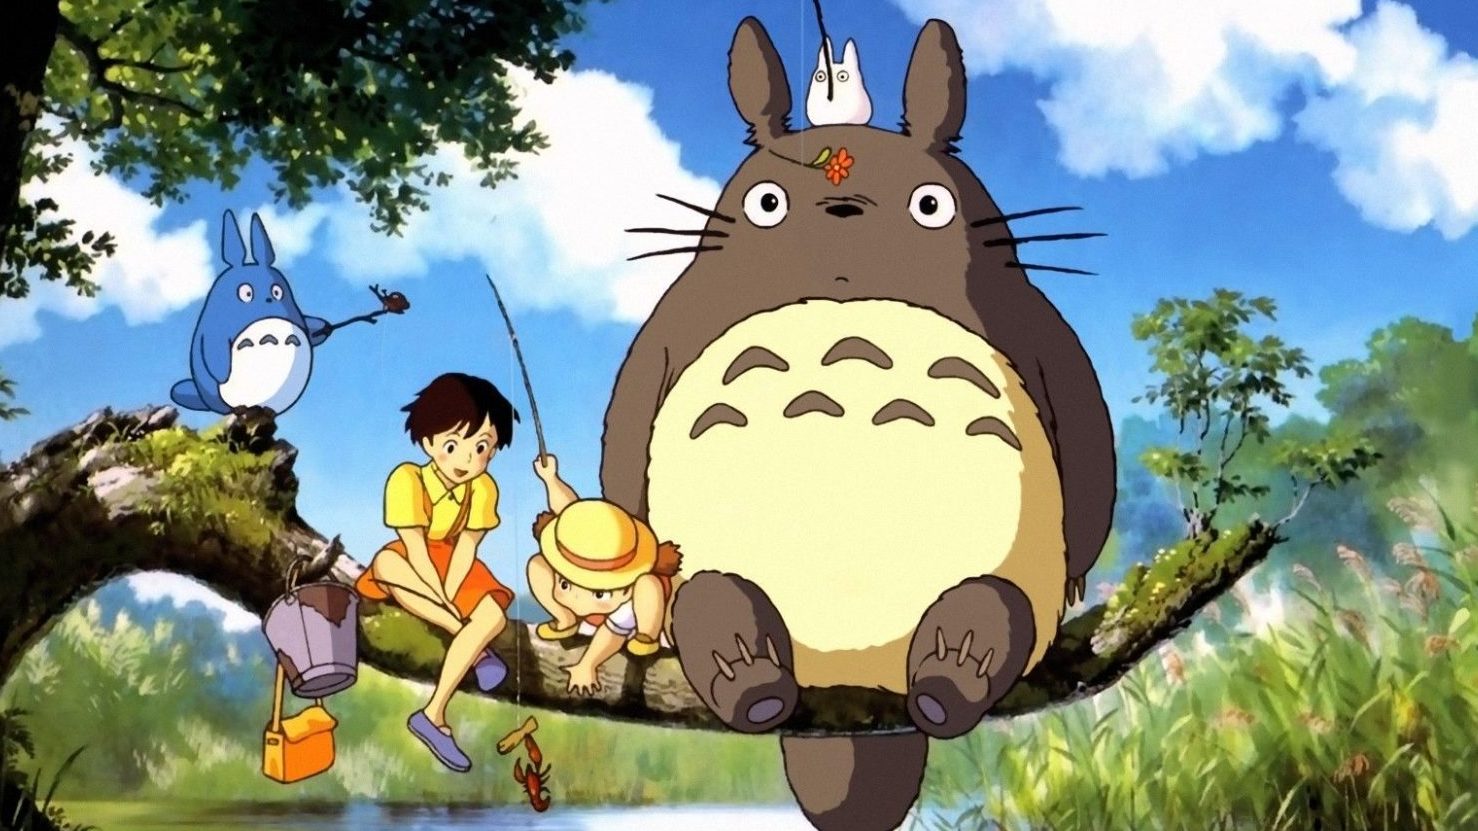 Here's where you can watch all the Studio Ghibli movies